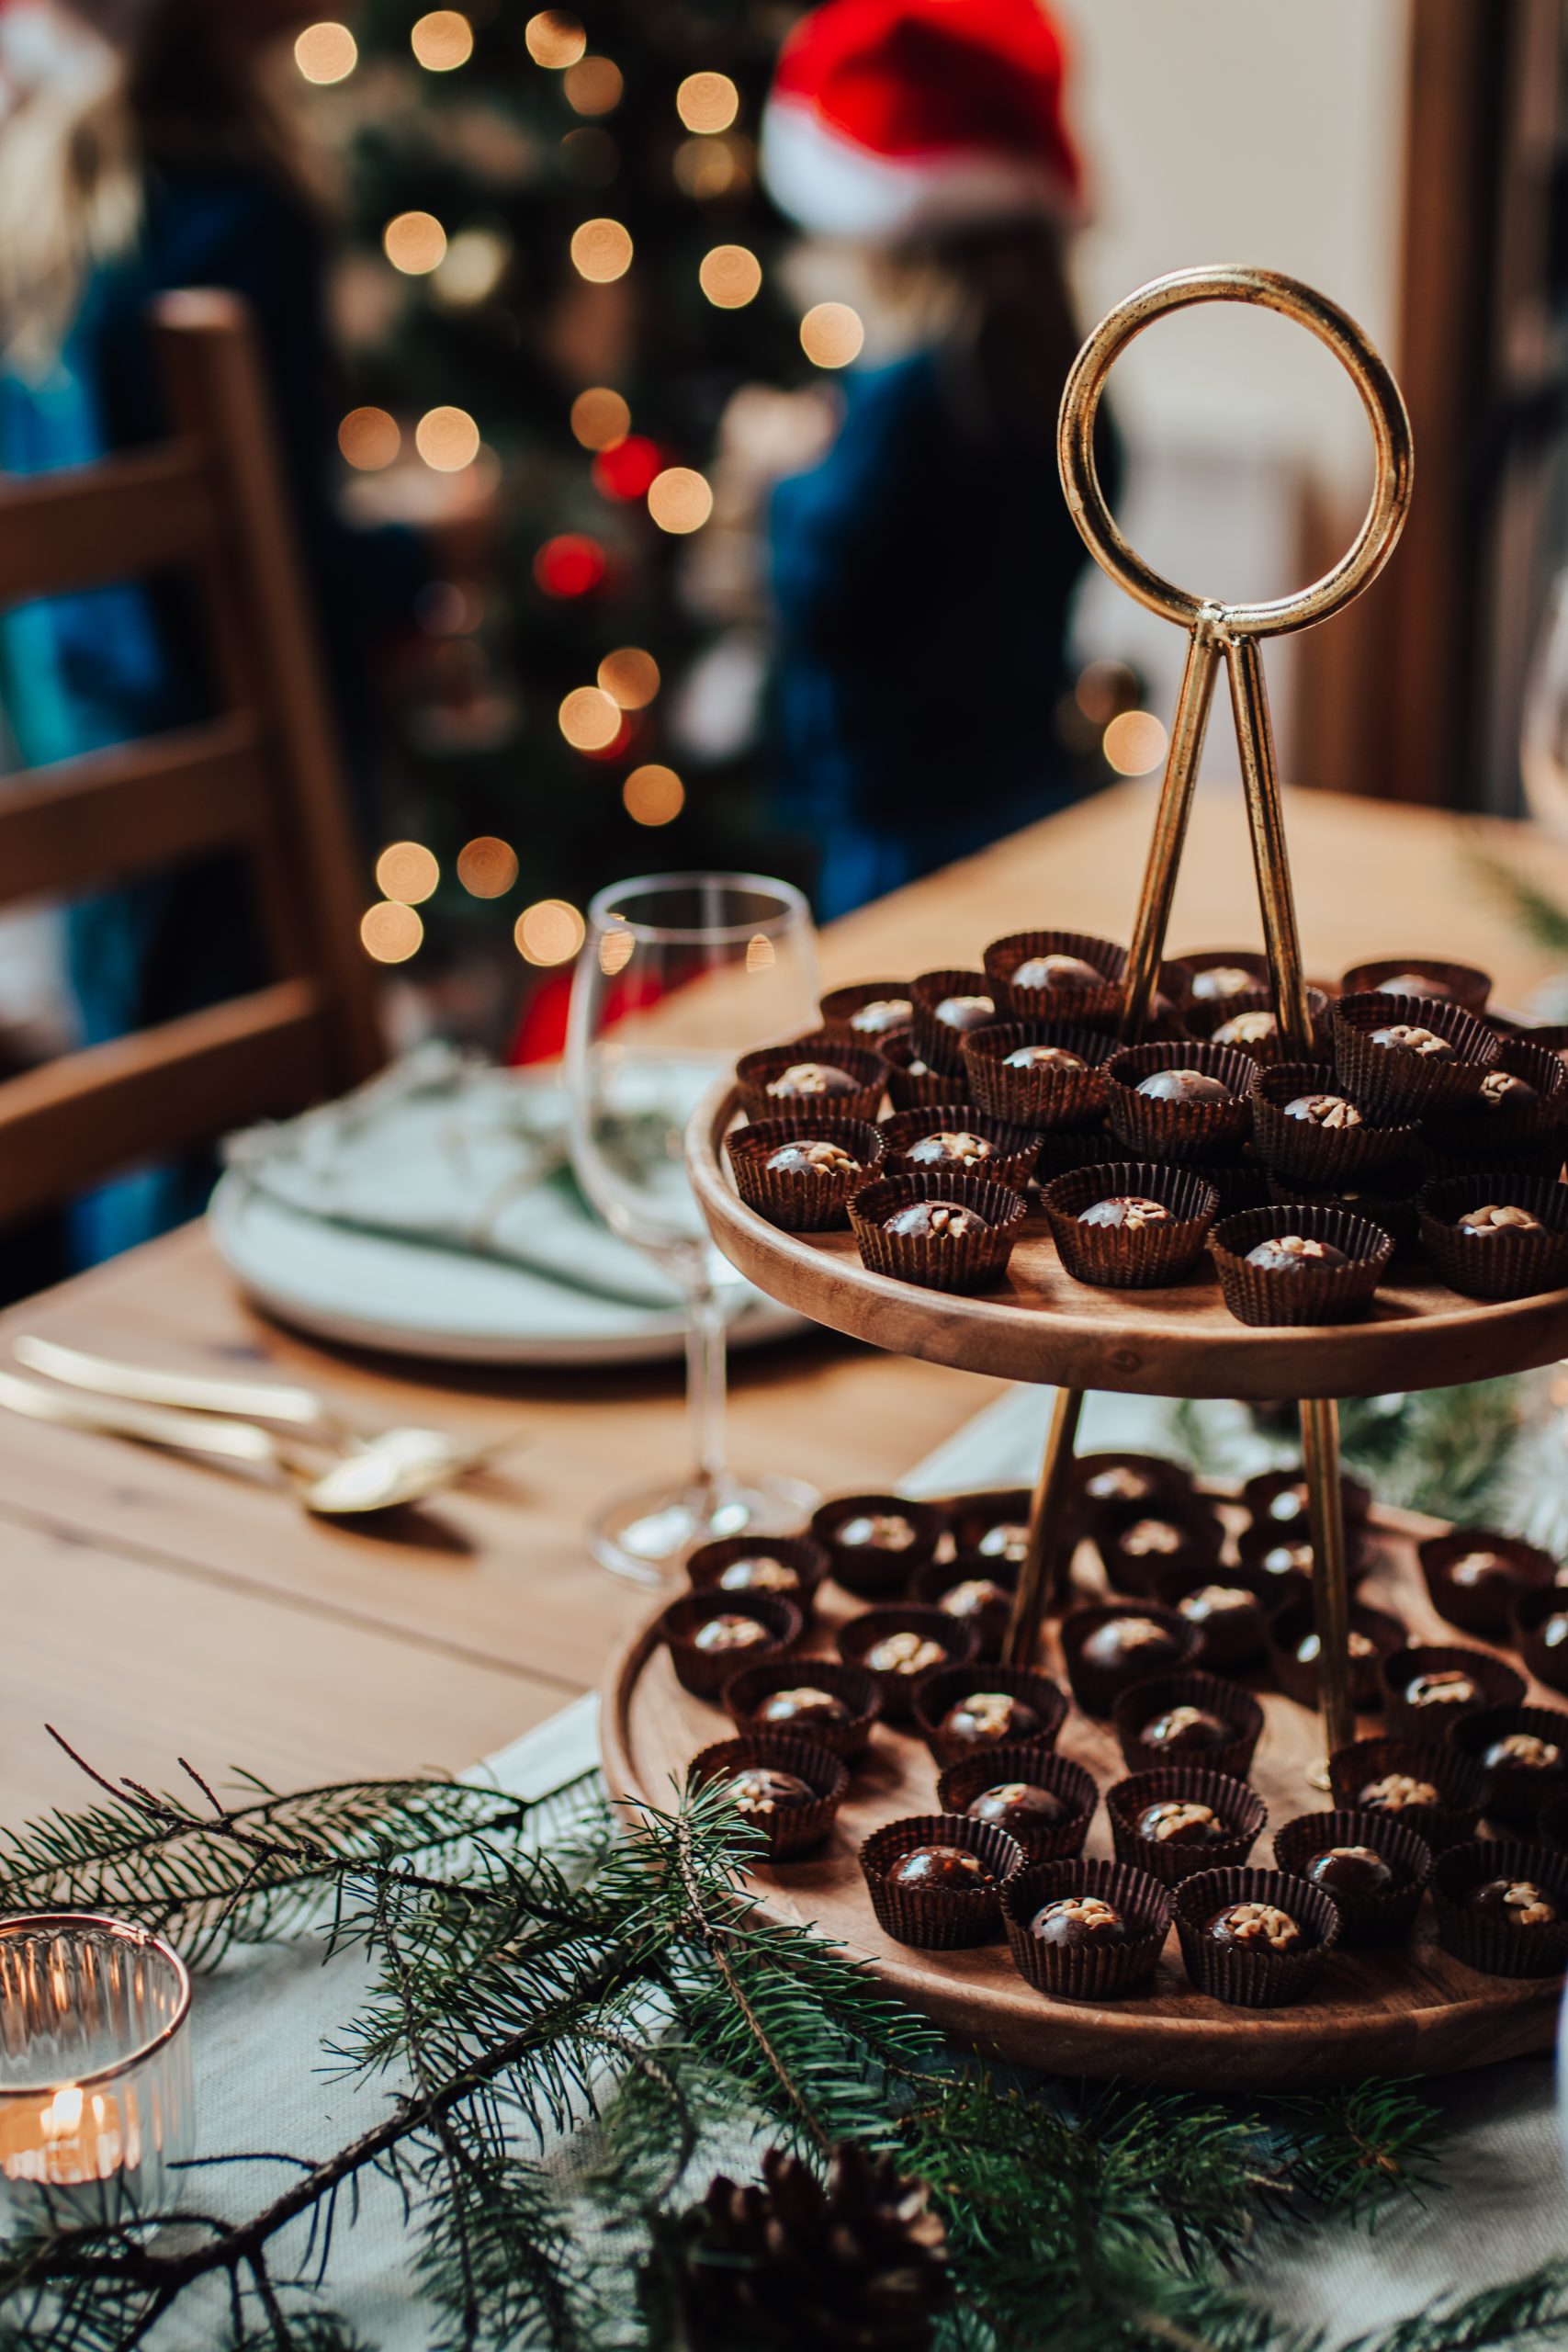 Chocolate truffles with holiday background